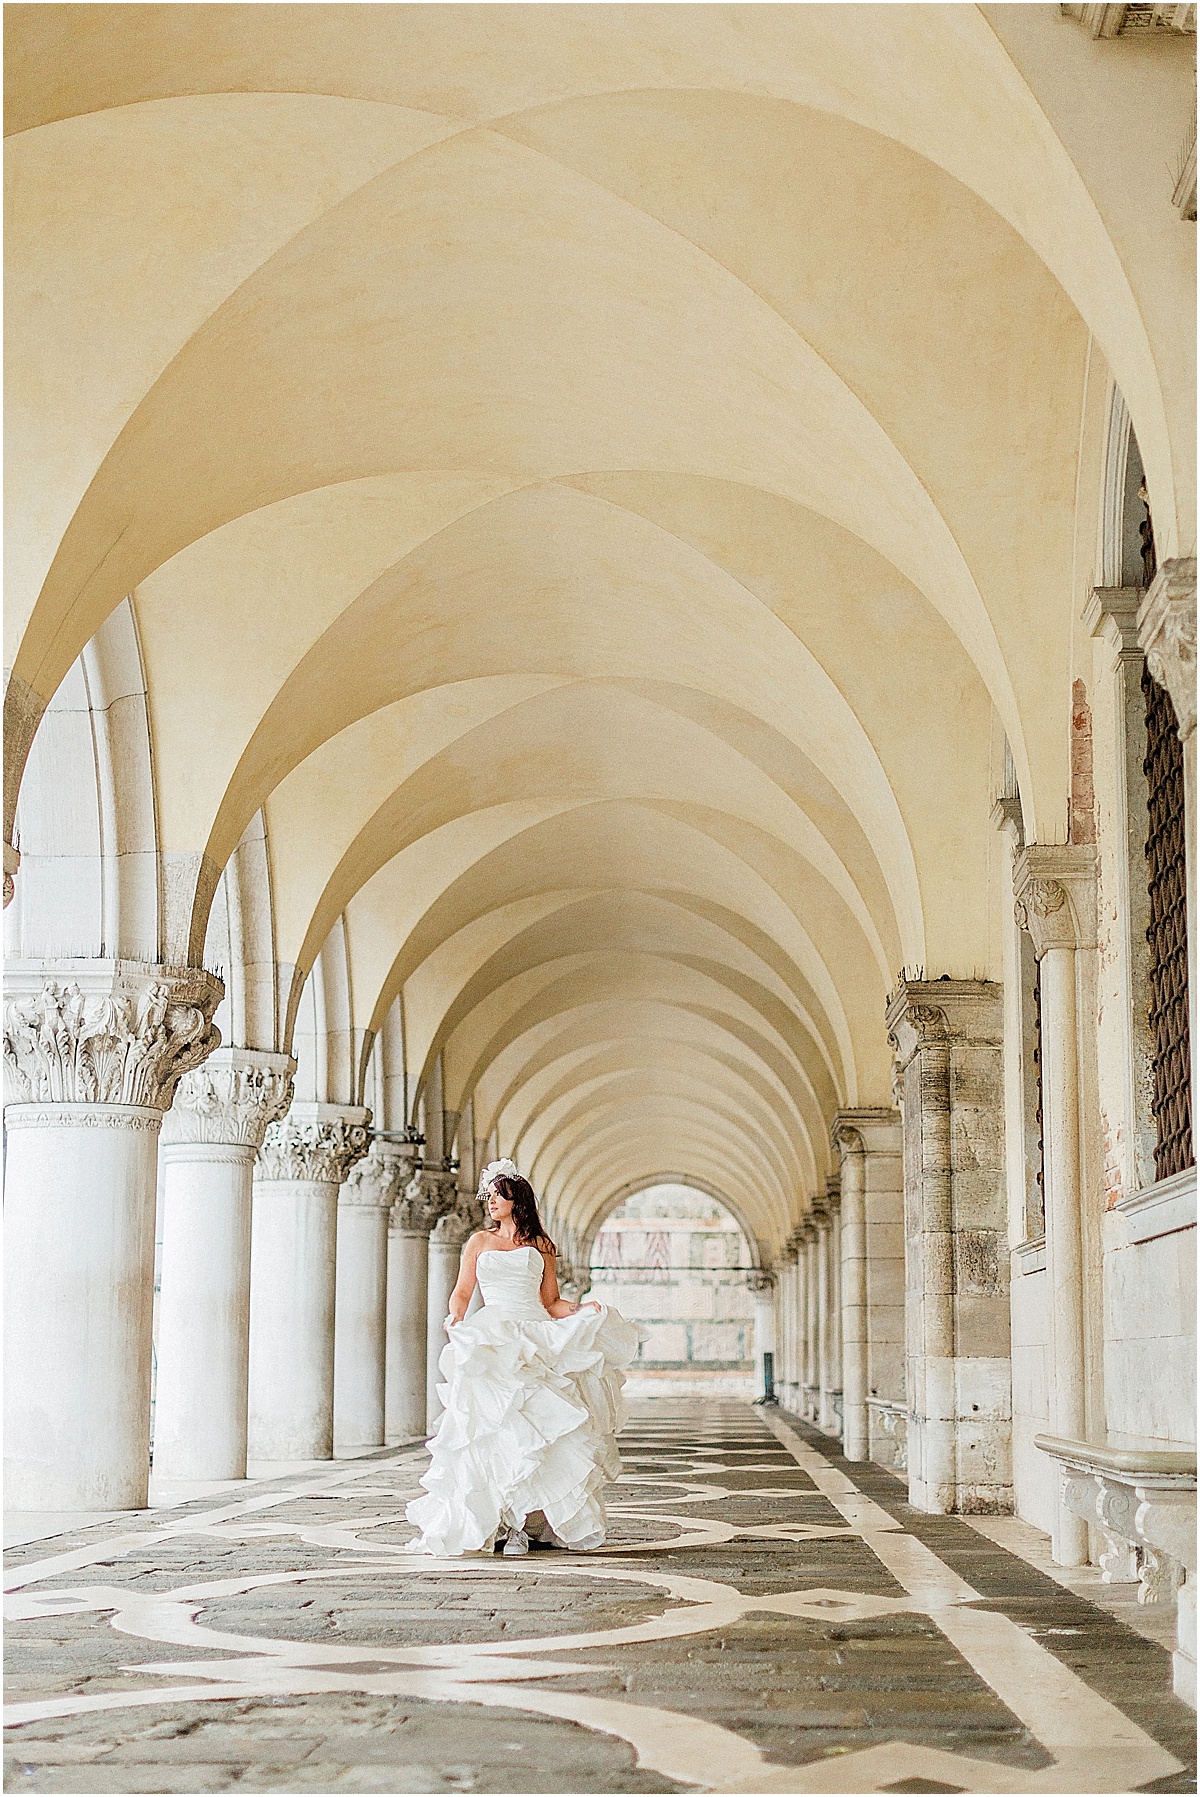 Bride walking down hall at Piazza San Marco Venice Italy Kate Marie Portraiture.jpg